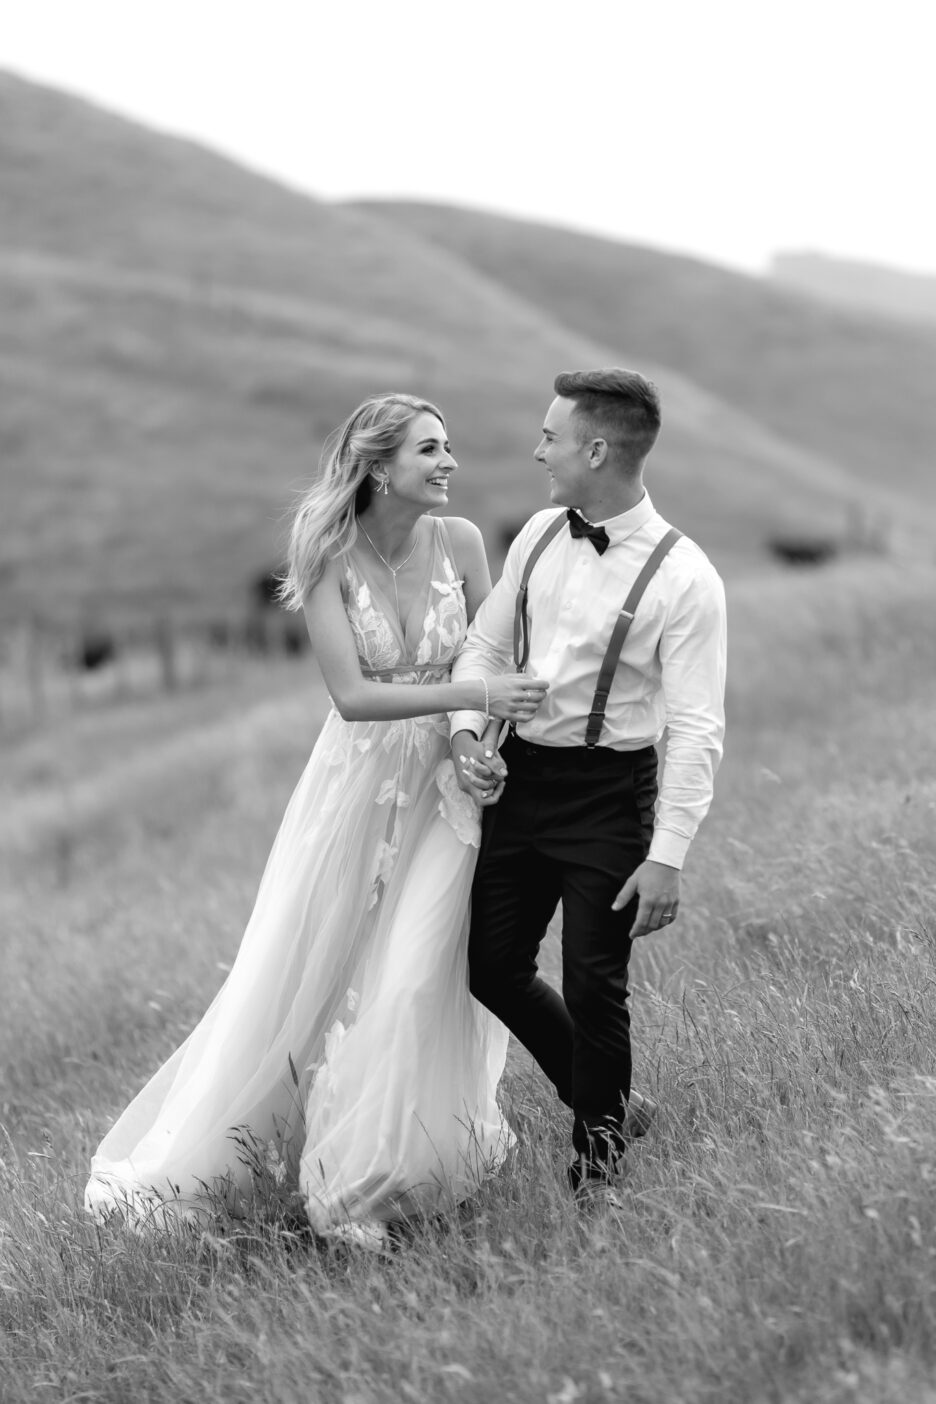 Hawkes Bay Waiterenui farm wedding couple walking in hills laughing during their photography